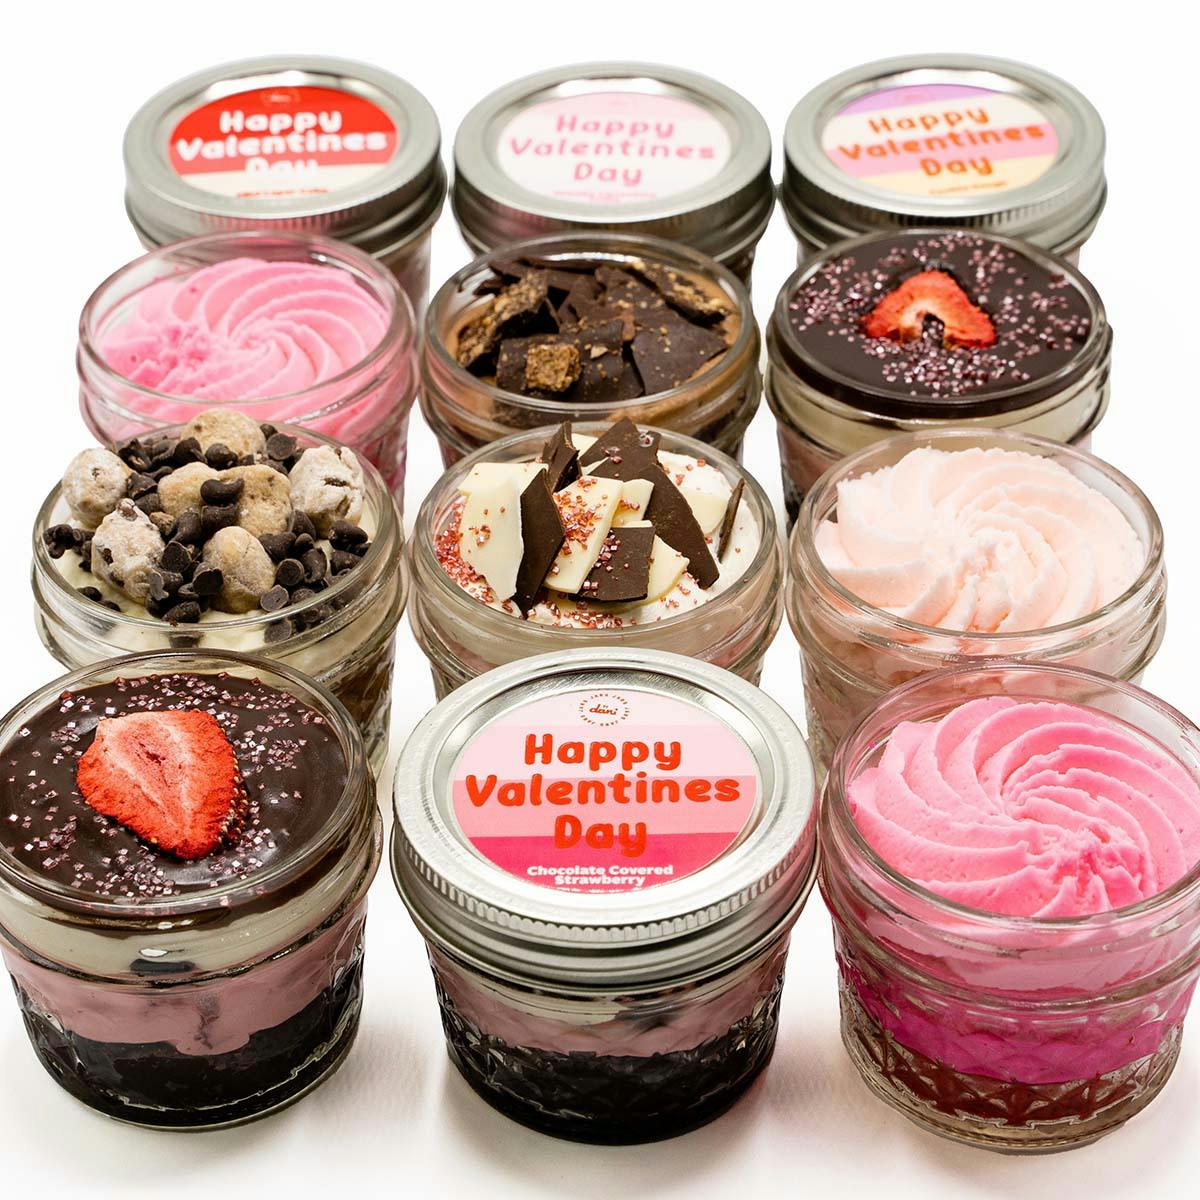 Valentine's Day Candle Gift Box (2 Candles + Matchbox)